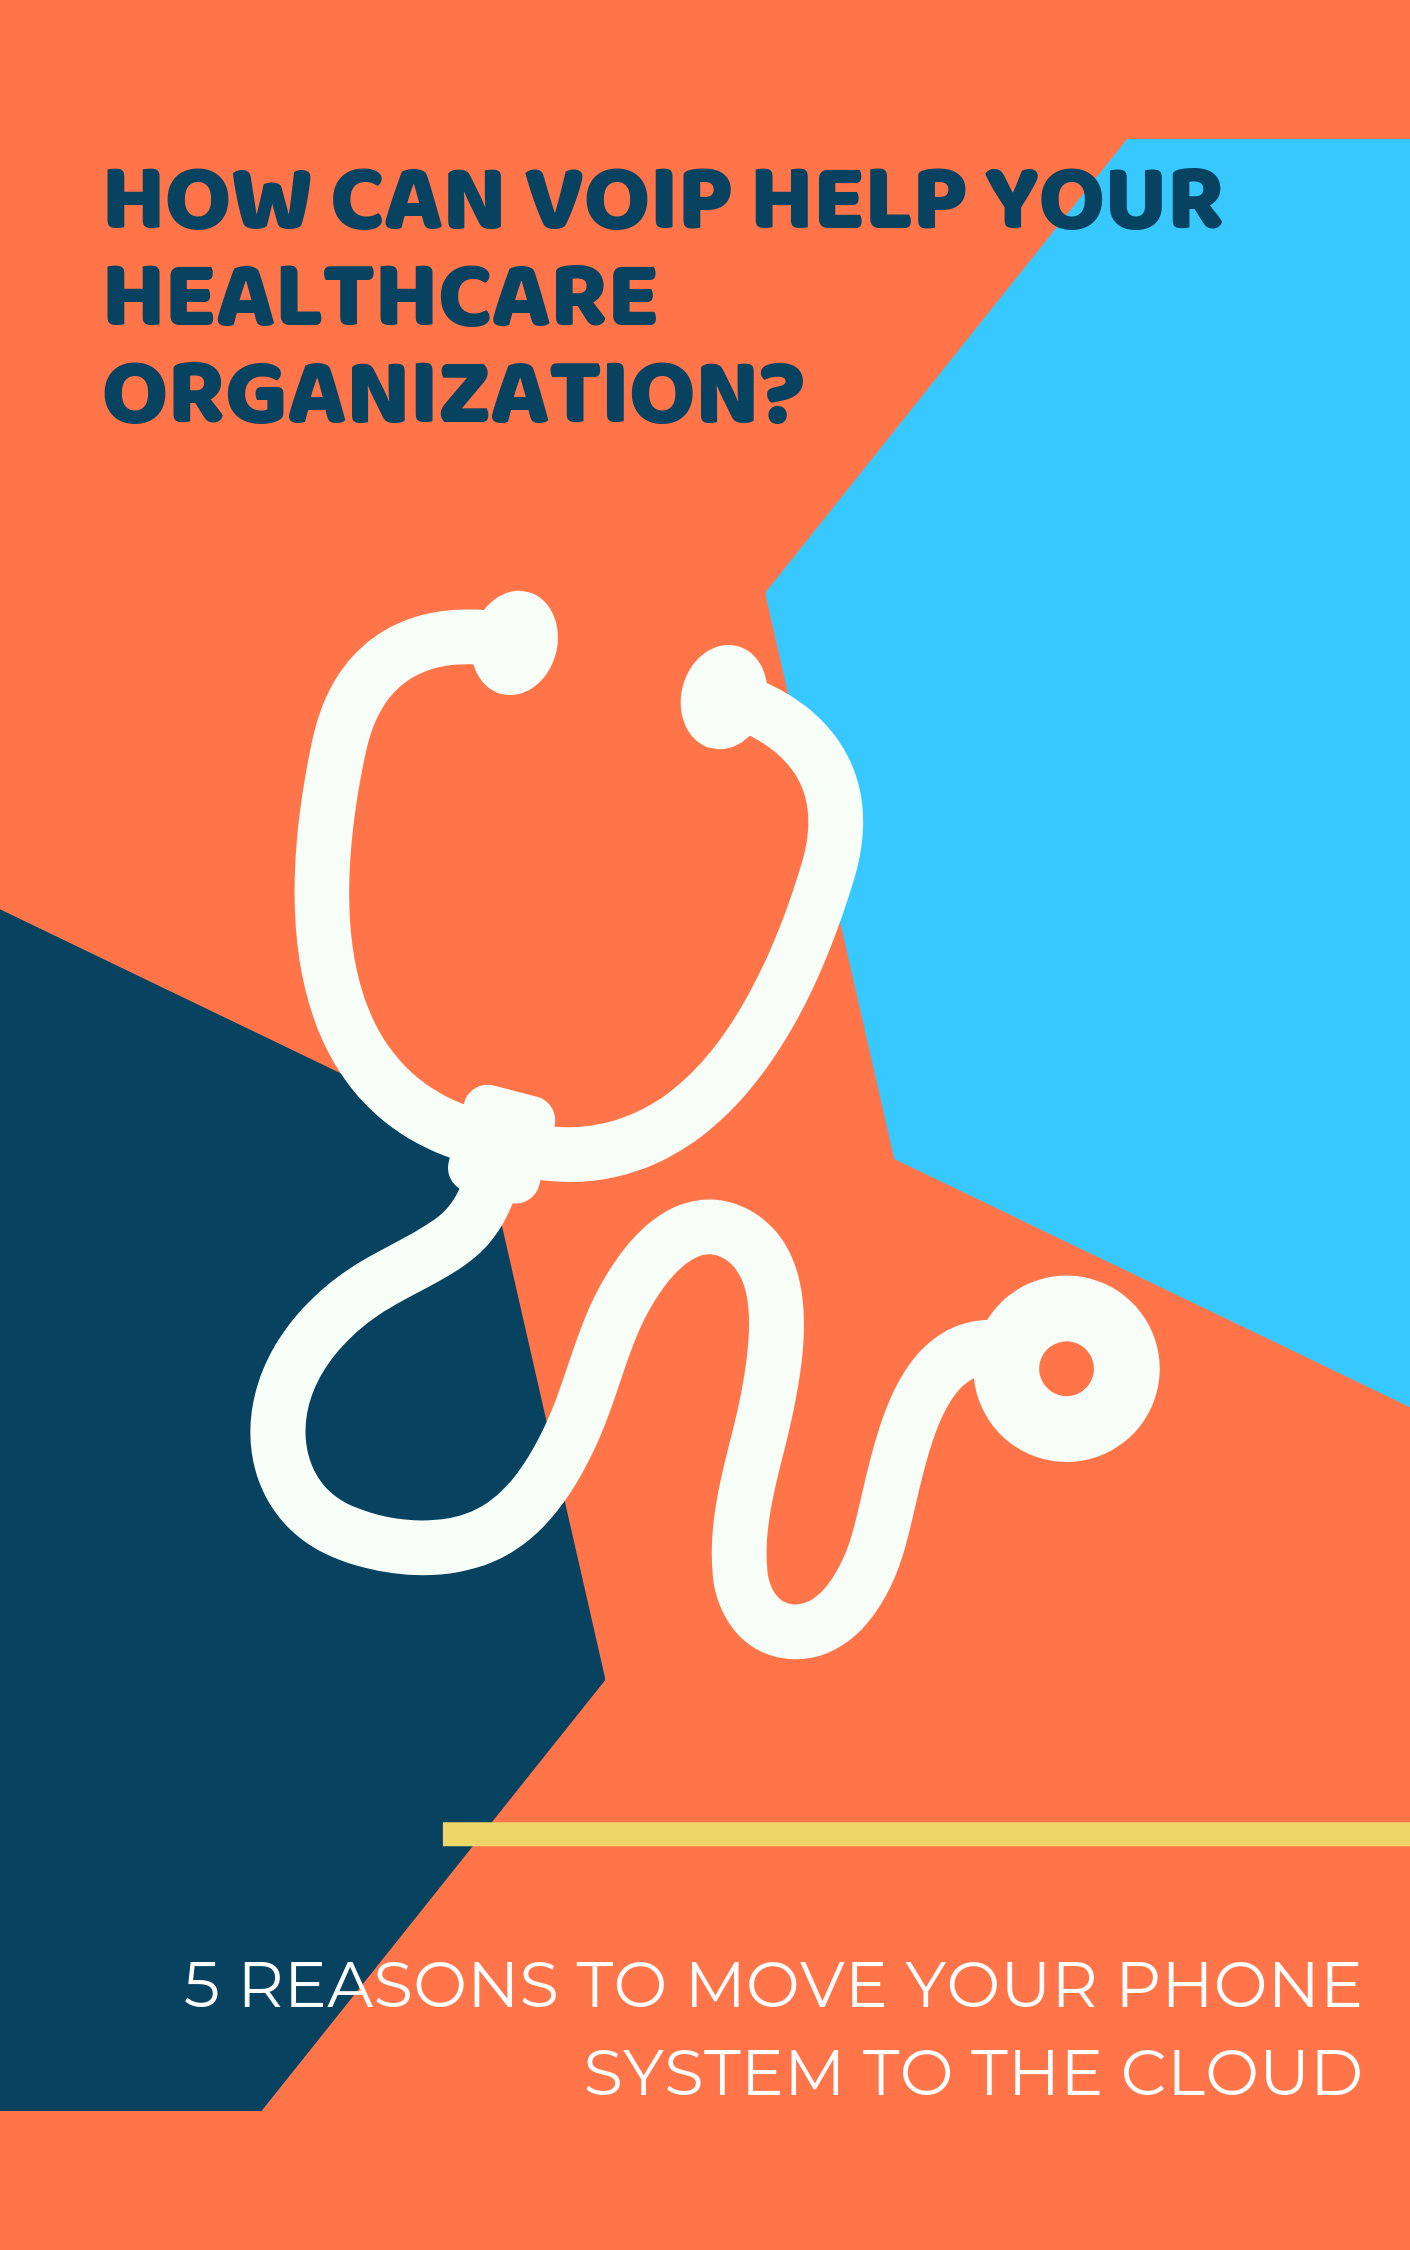 VoIP for Healthcare